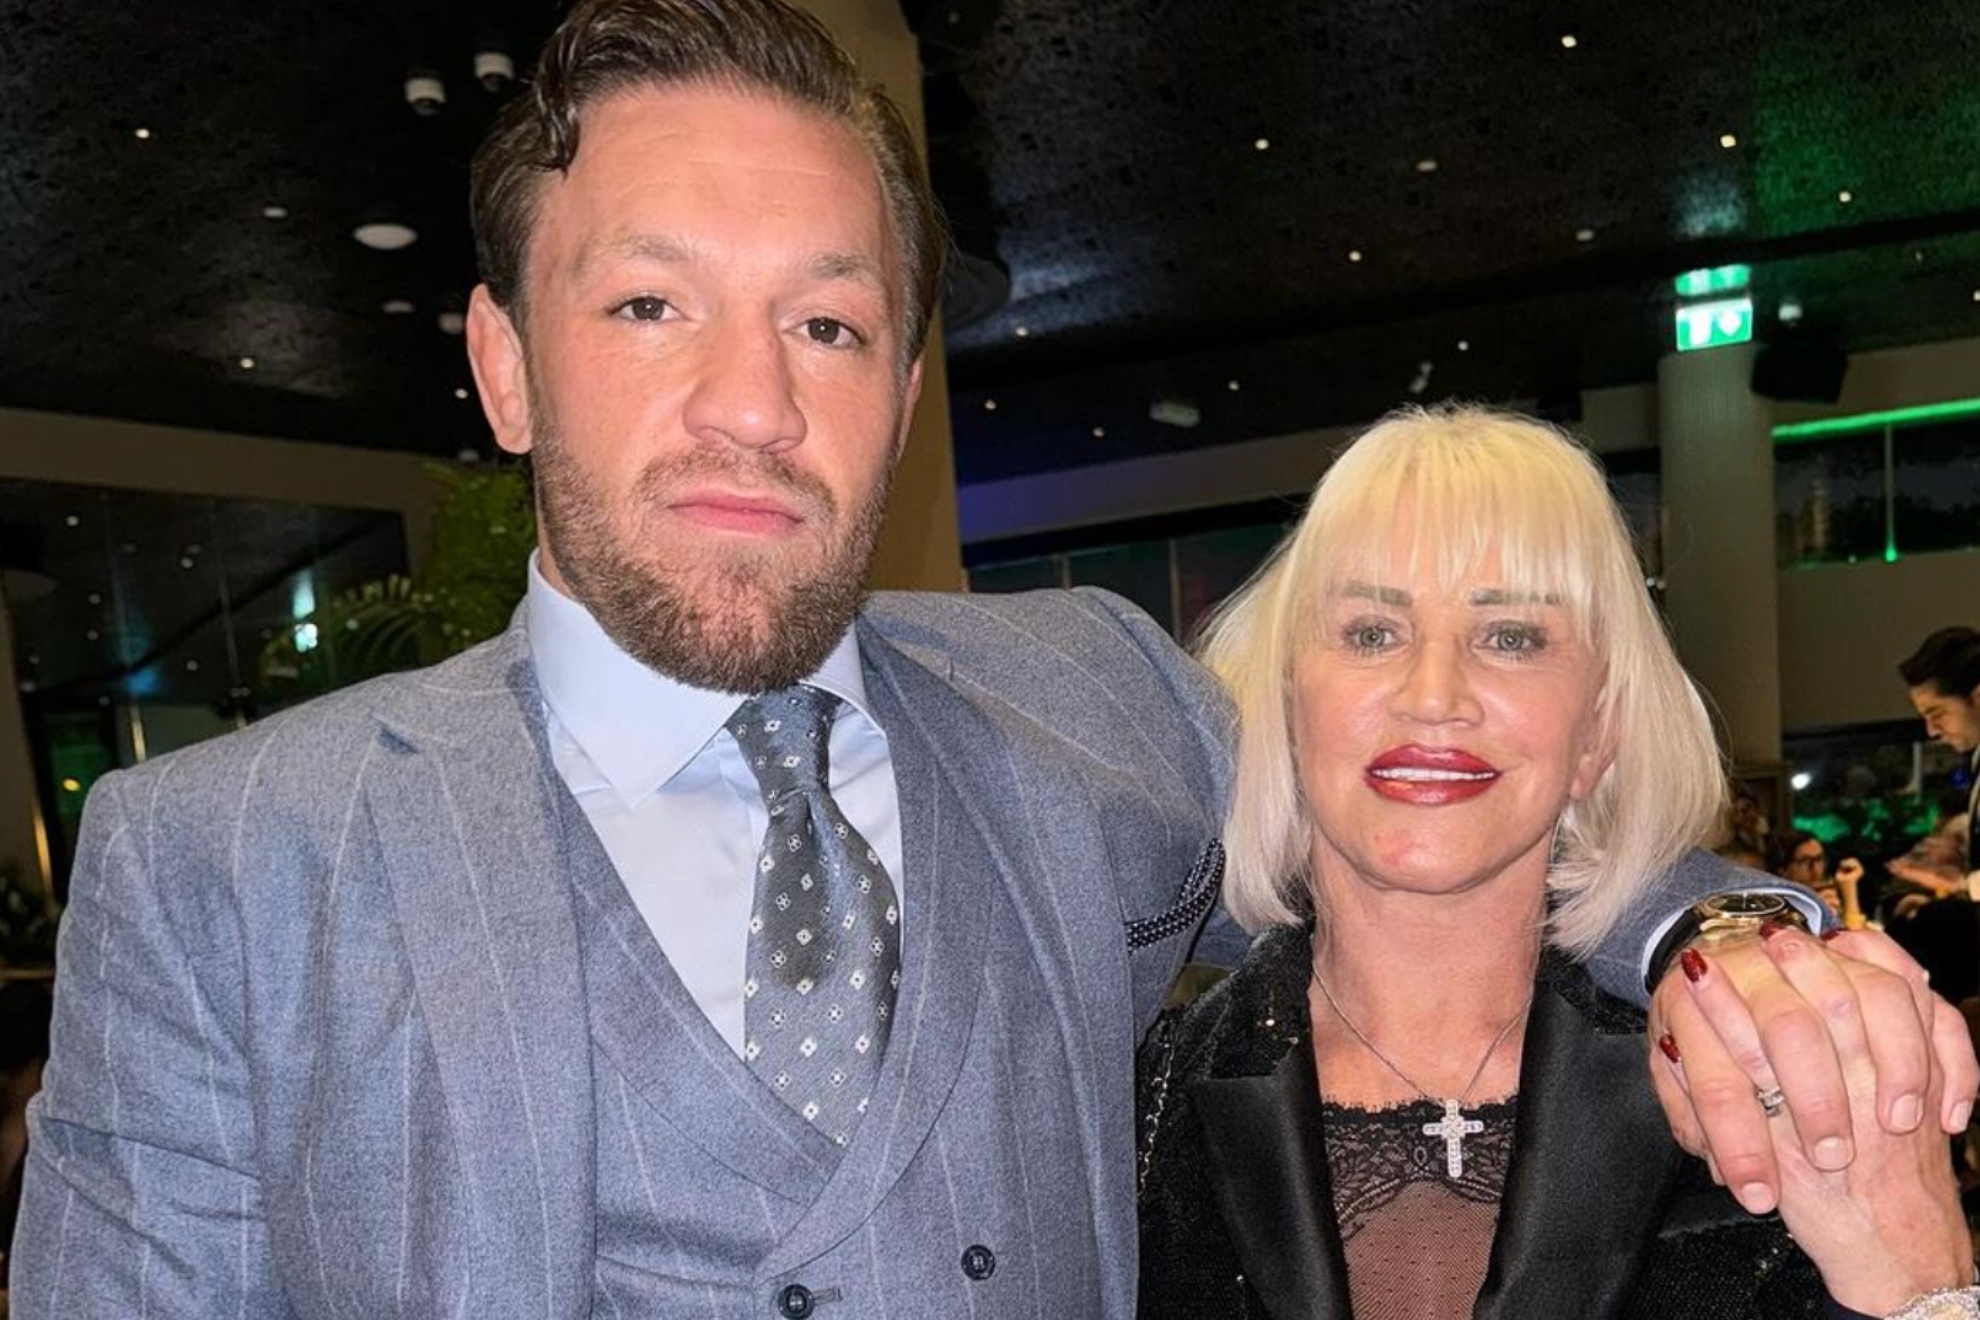 Conor McGregor and his mother at a public event